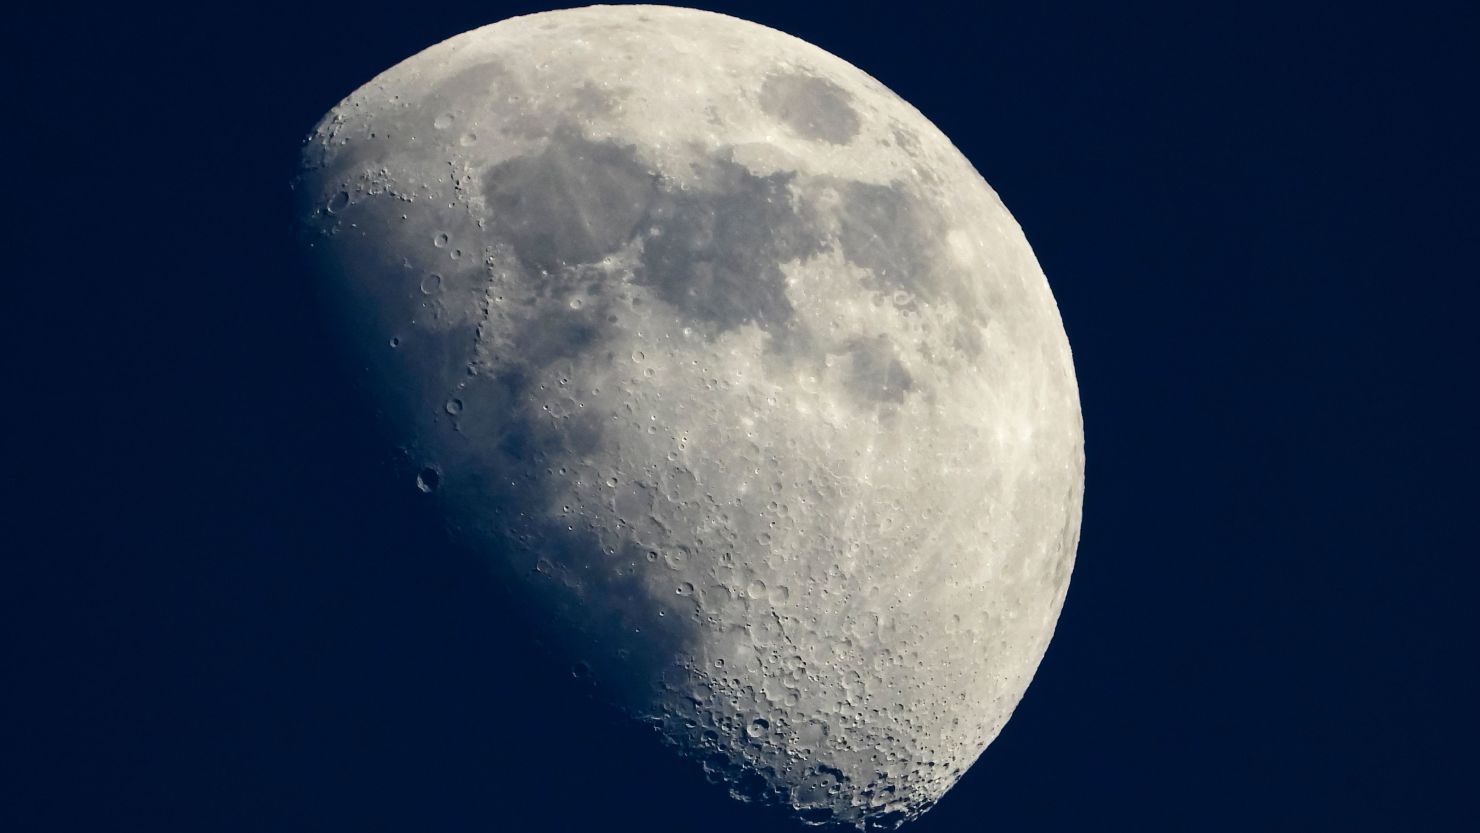  A photo taken on May 13, 2019, shows a view of the moon from Cannes, southern France.